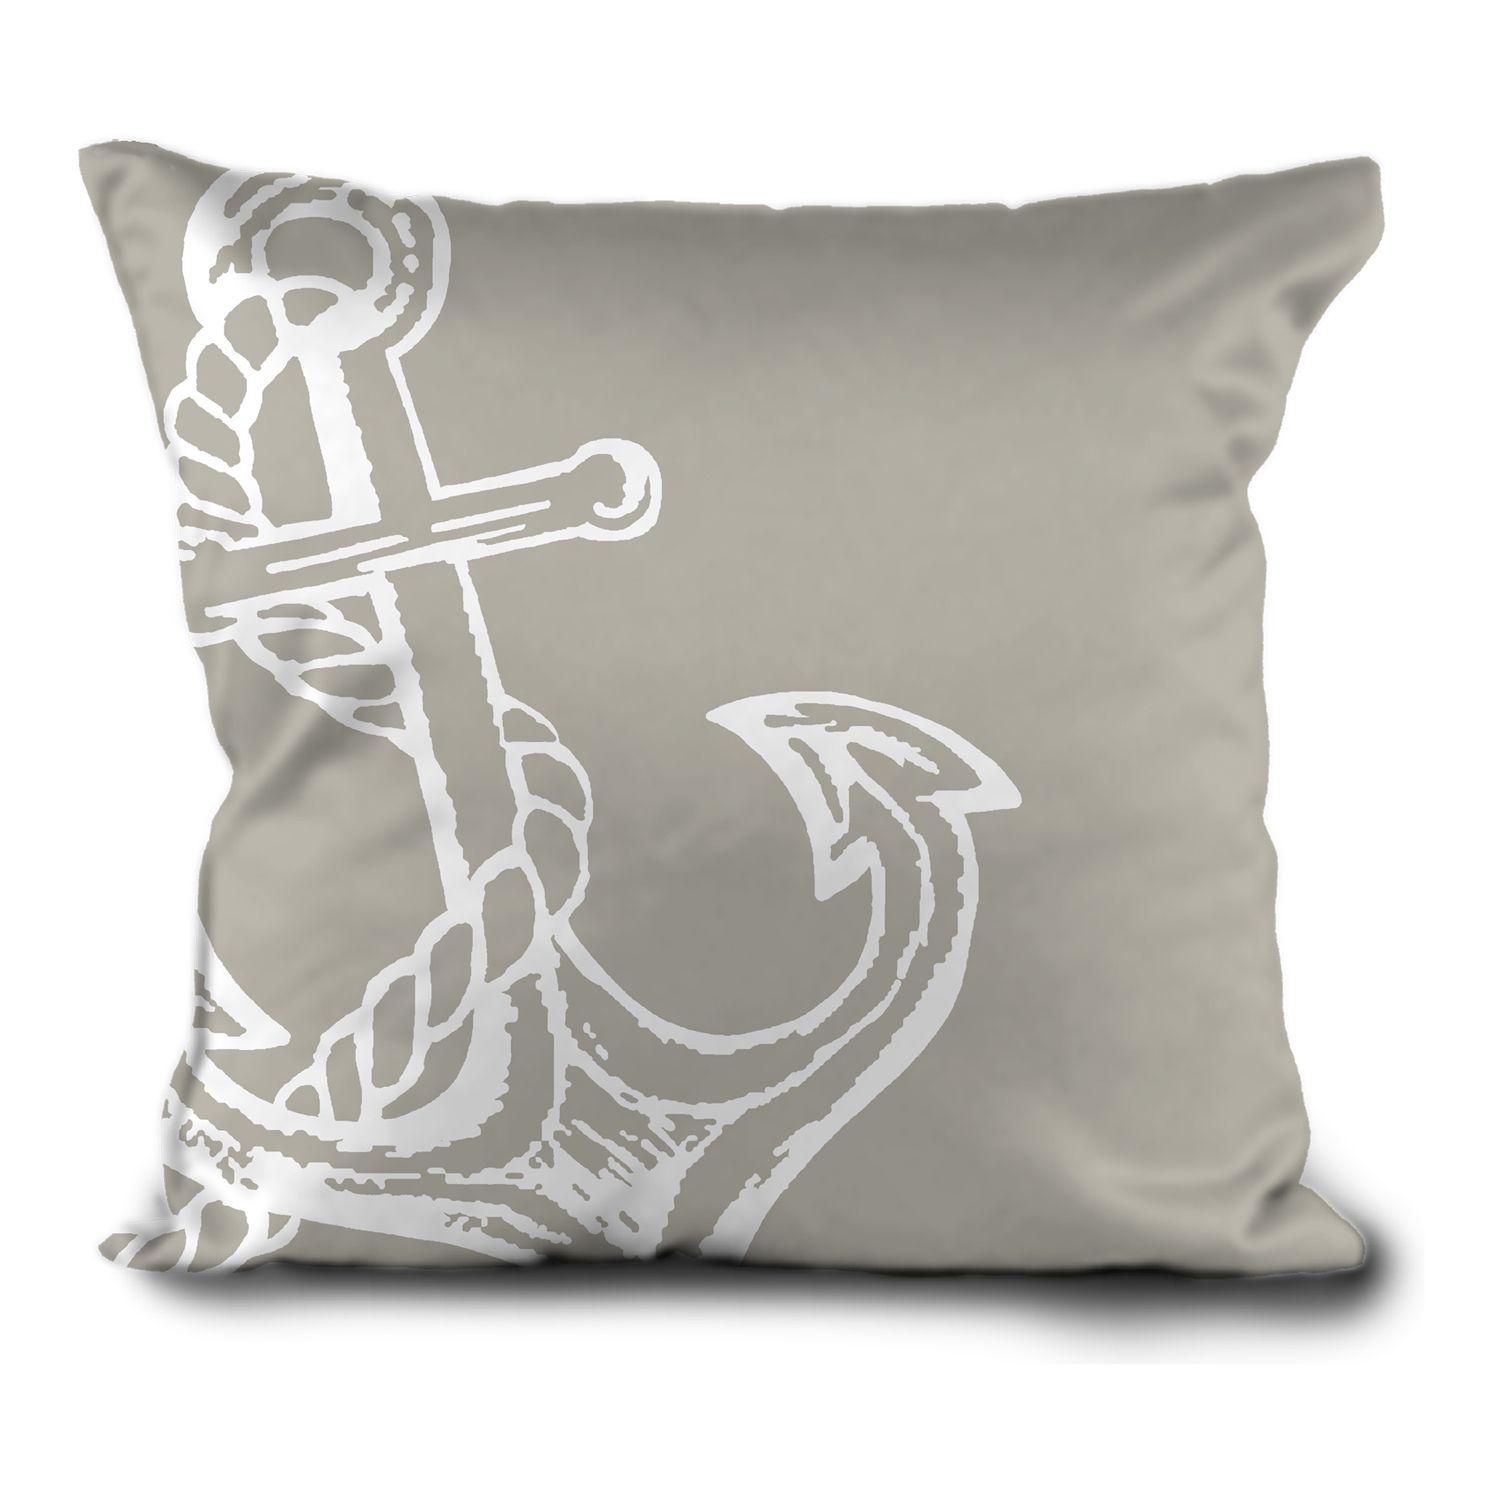 Image for HFI Anchor Me Down Textured Print Throw Pillow at Kohl's.